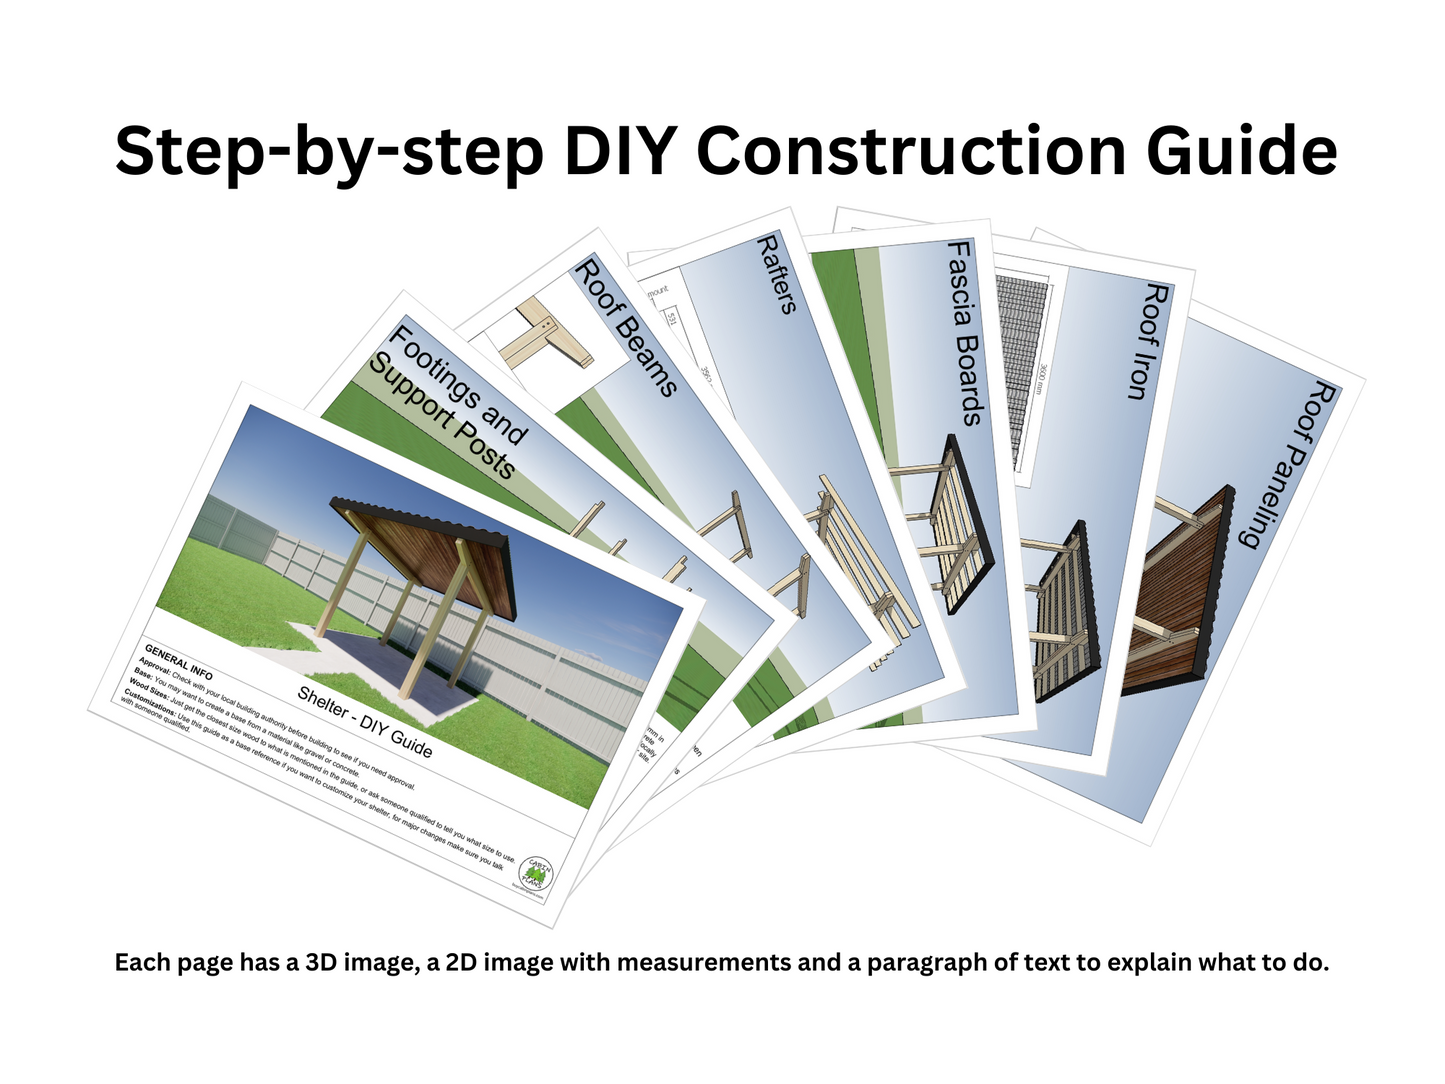 Outdoor Shelter - Step-By-Step DIY Construction Guide and Materials List || 2.5m x 2.5m (8' x 8') - Undercover Area, Gazebo